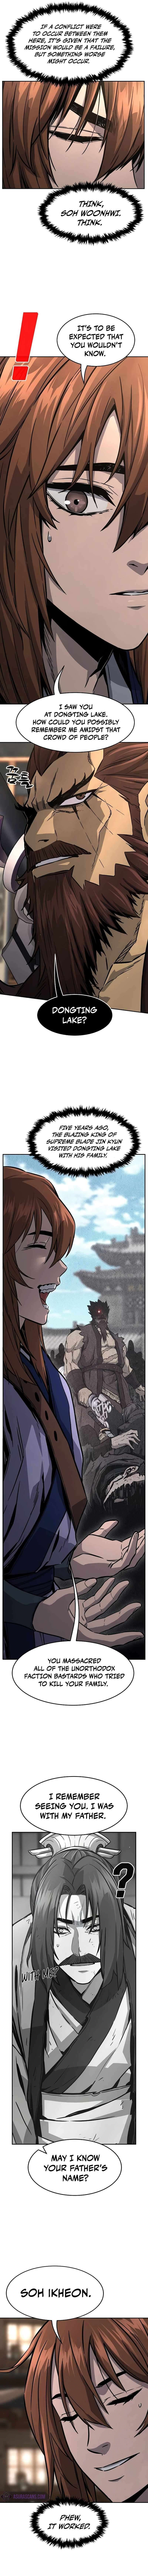 Absolute Sword Sense Chapter 70 page 4